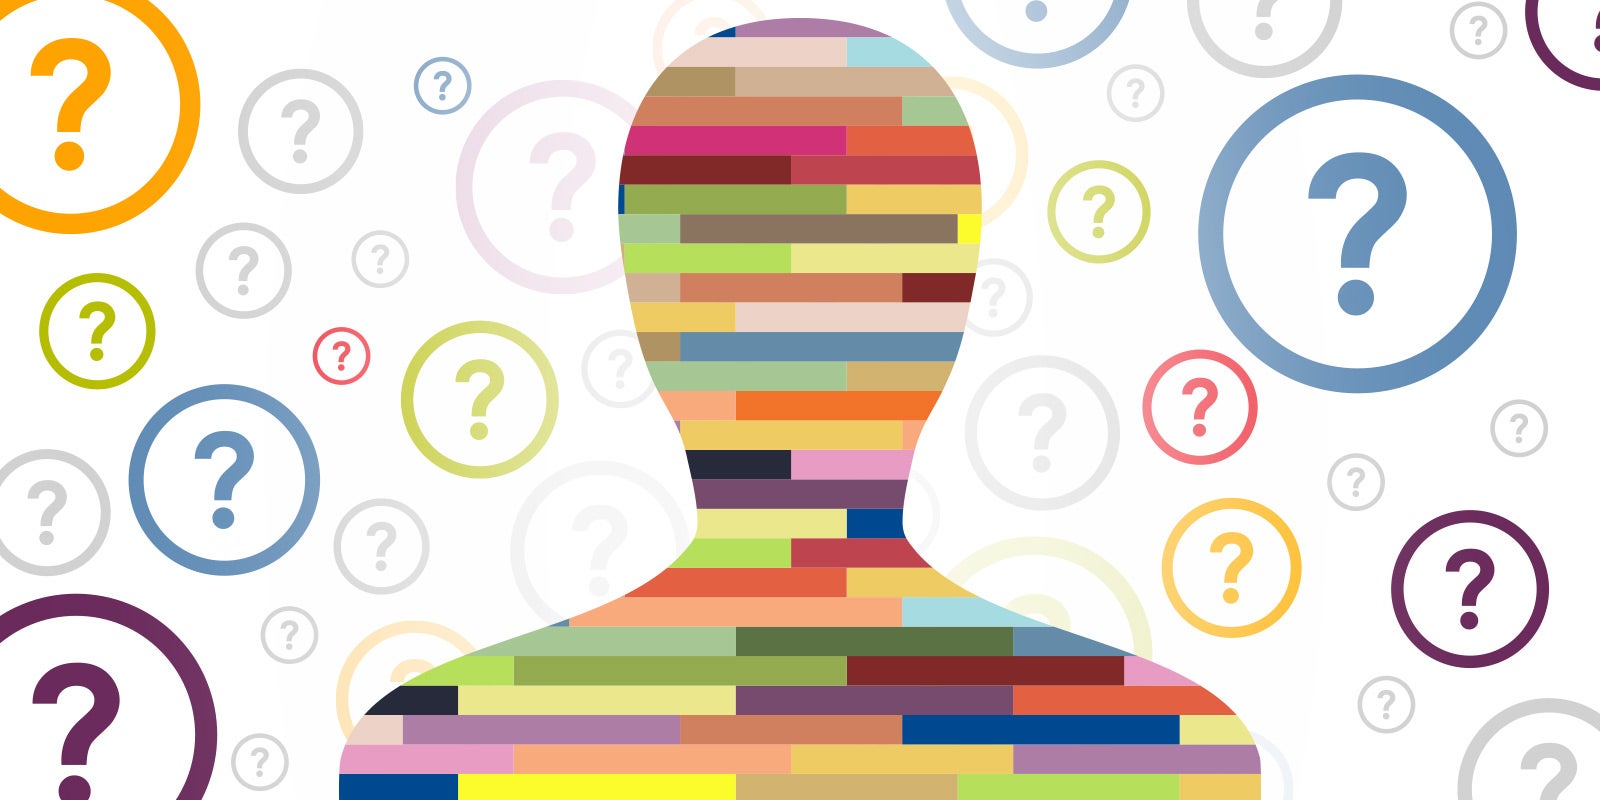 question marks surround a shaded head and upper body of a person filled in with bands of different colors to showcase this blog is about how to use personality tests at work